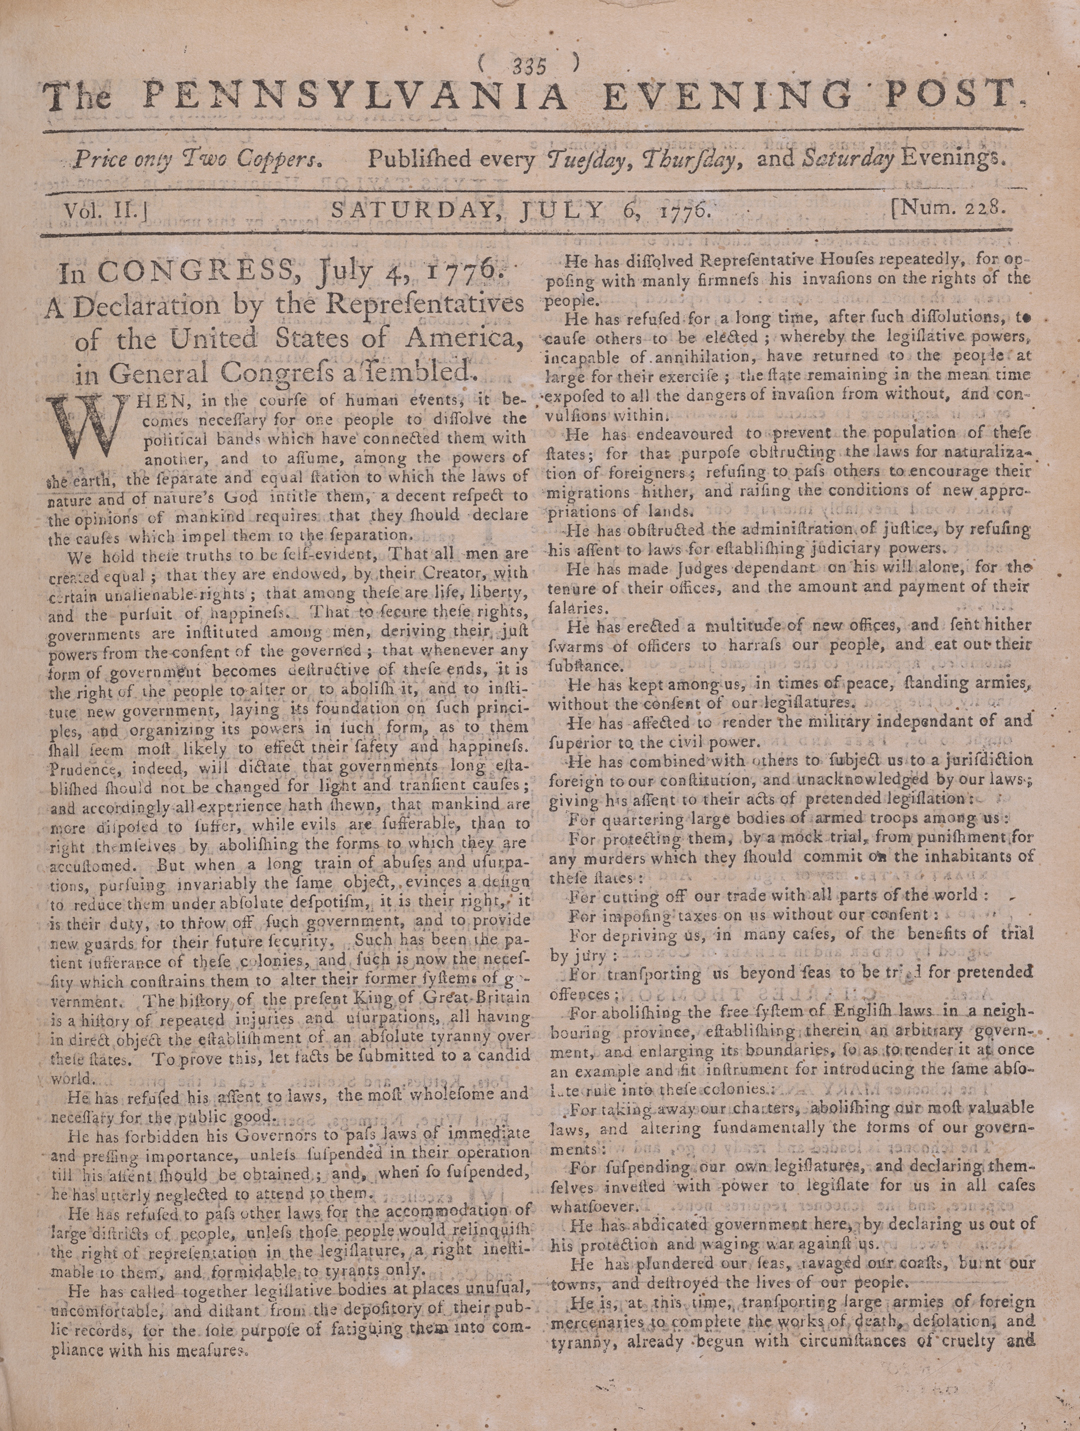 The Pennsylvania Evening Post newspaper with two columns of faded black text on beige paper.